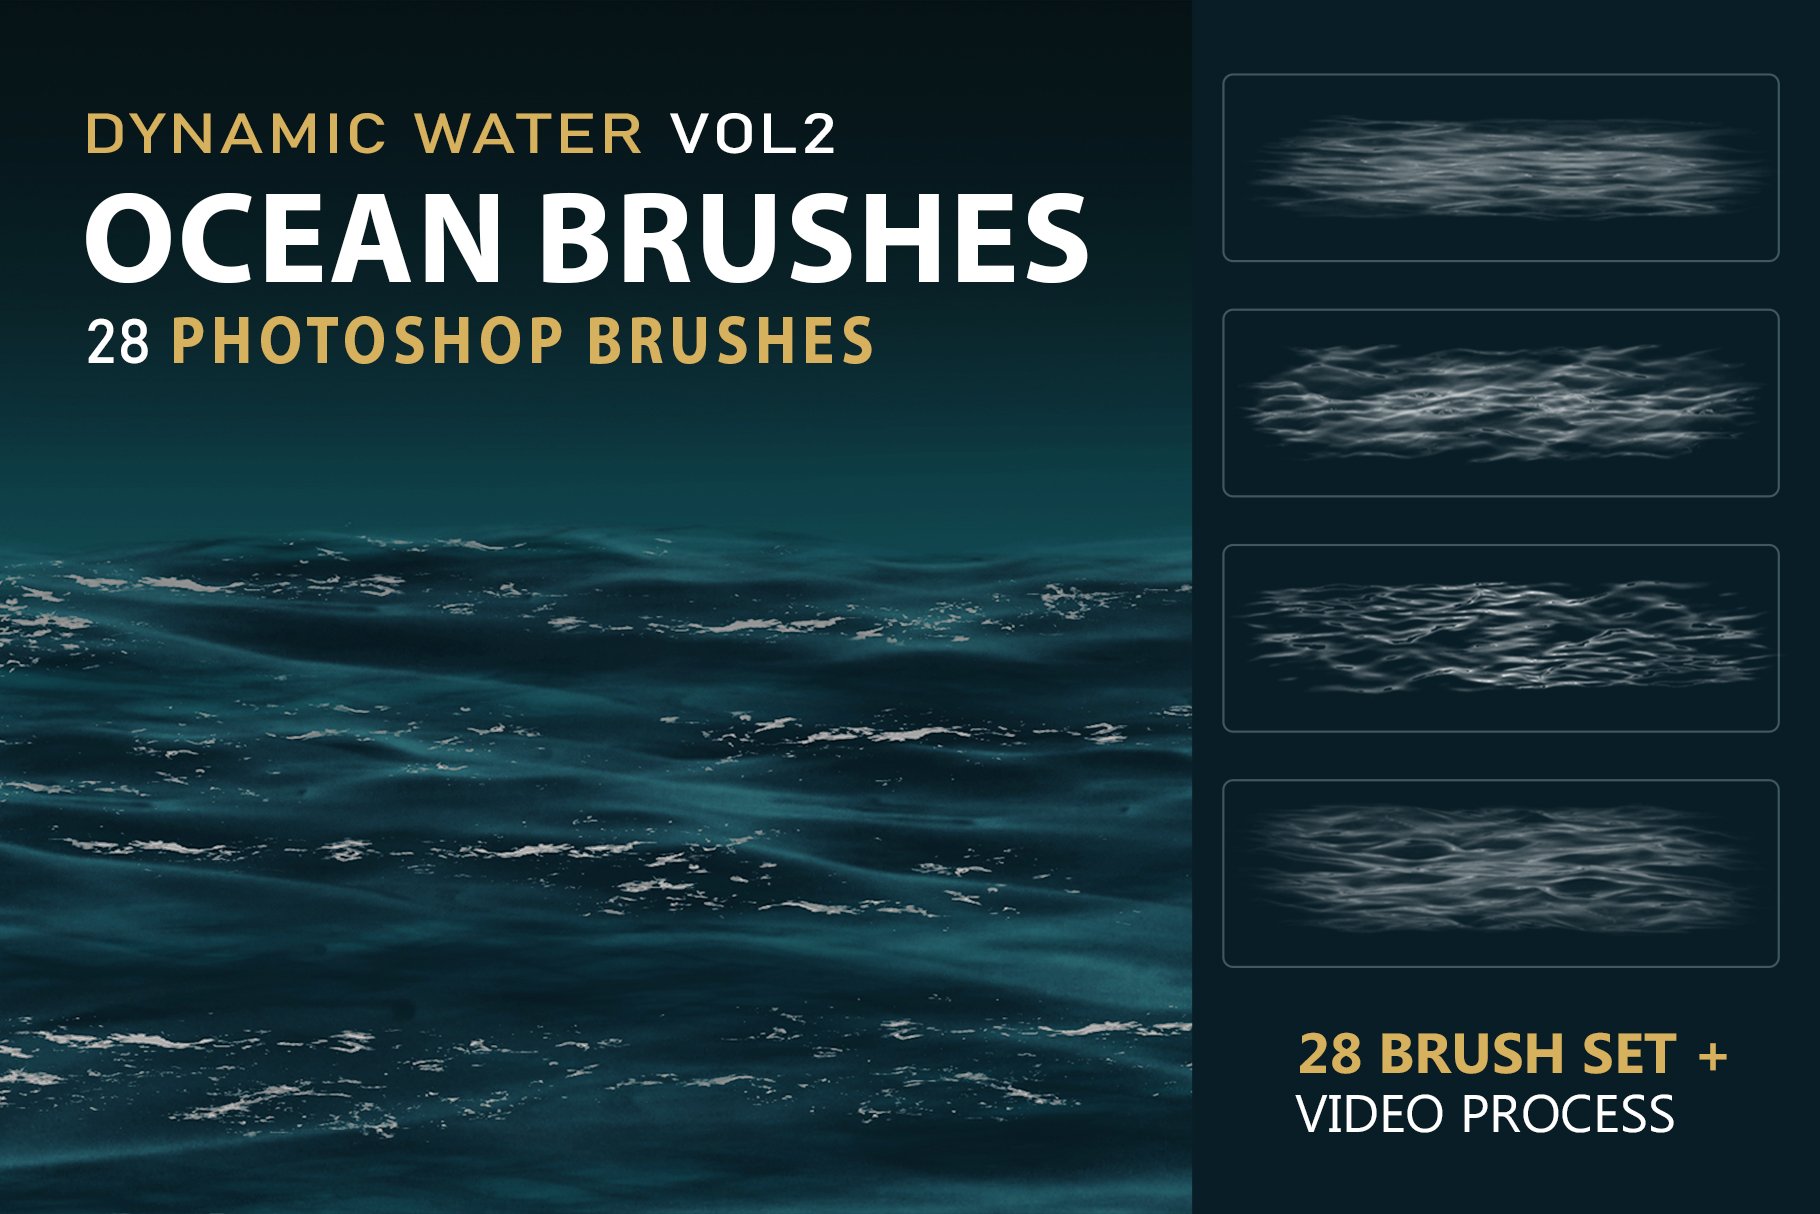 Dynamic Ocean Photoshop Brushes VOL2cover image.